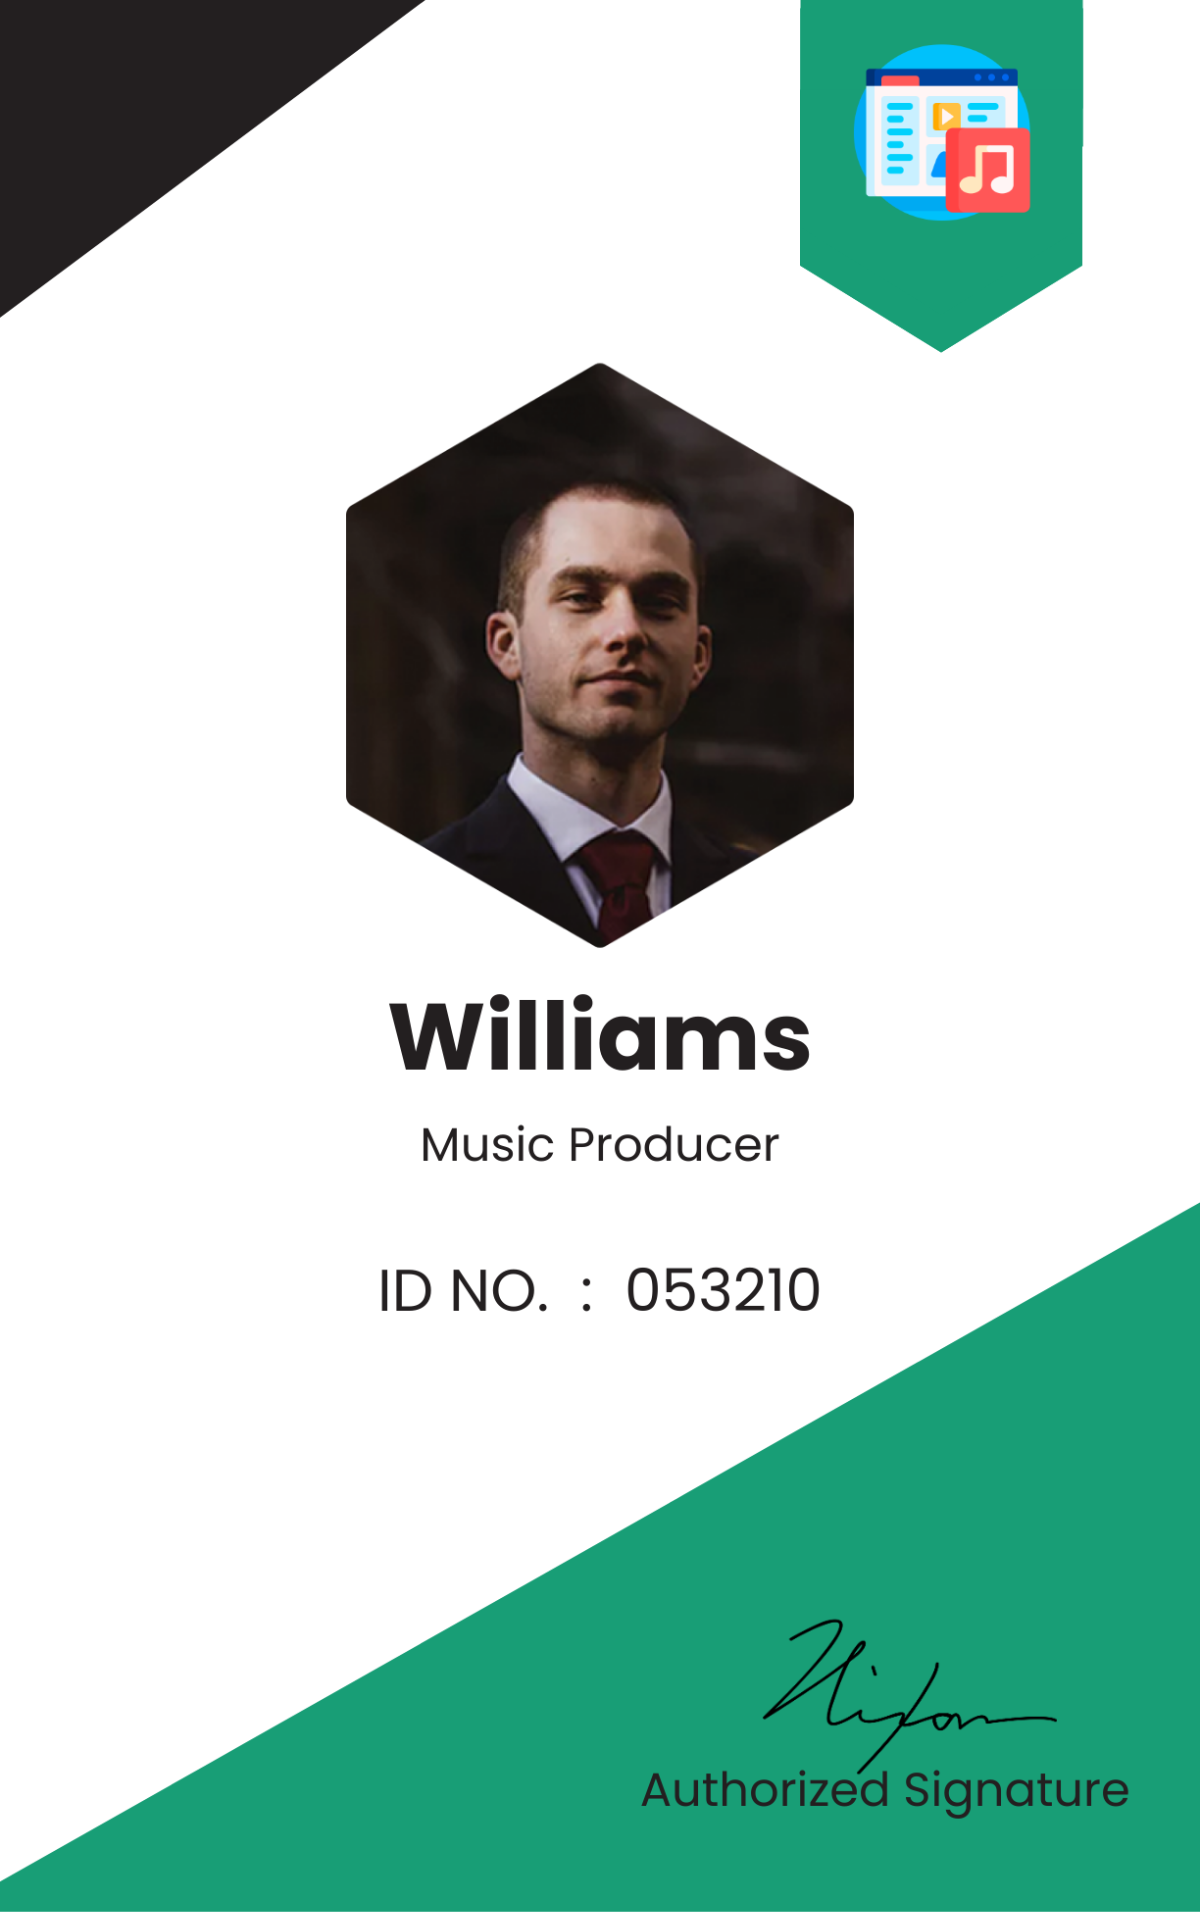 Music Production ID Card